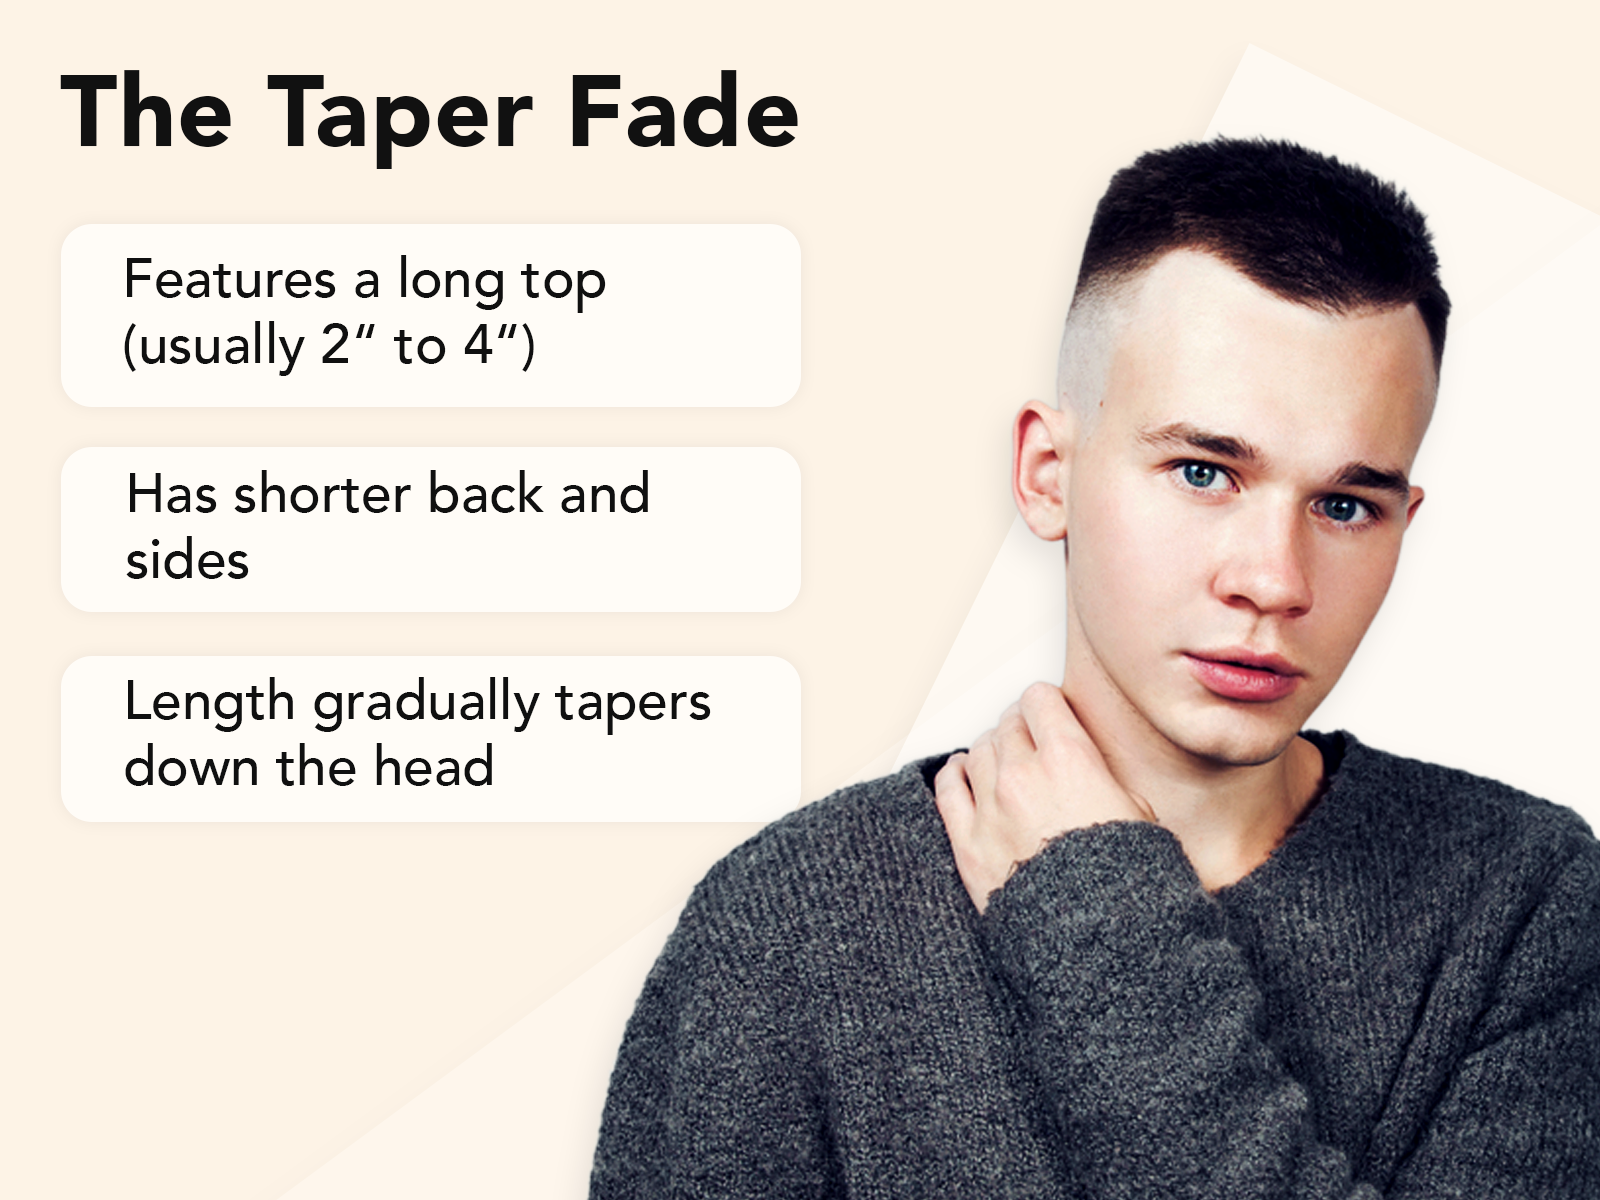 Taper fade explainer image on a tan background